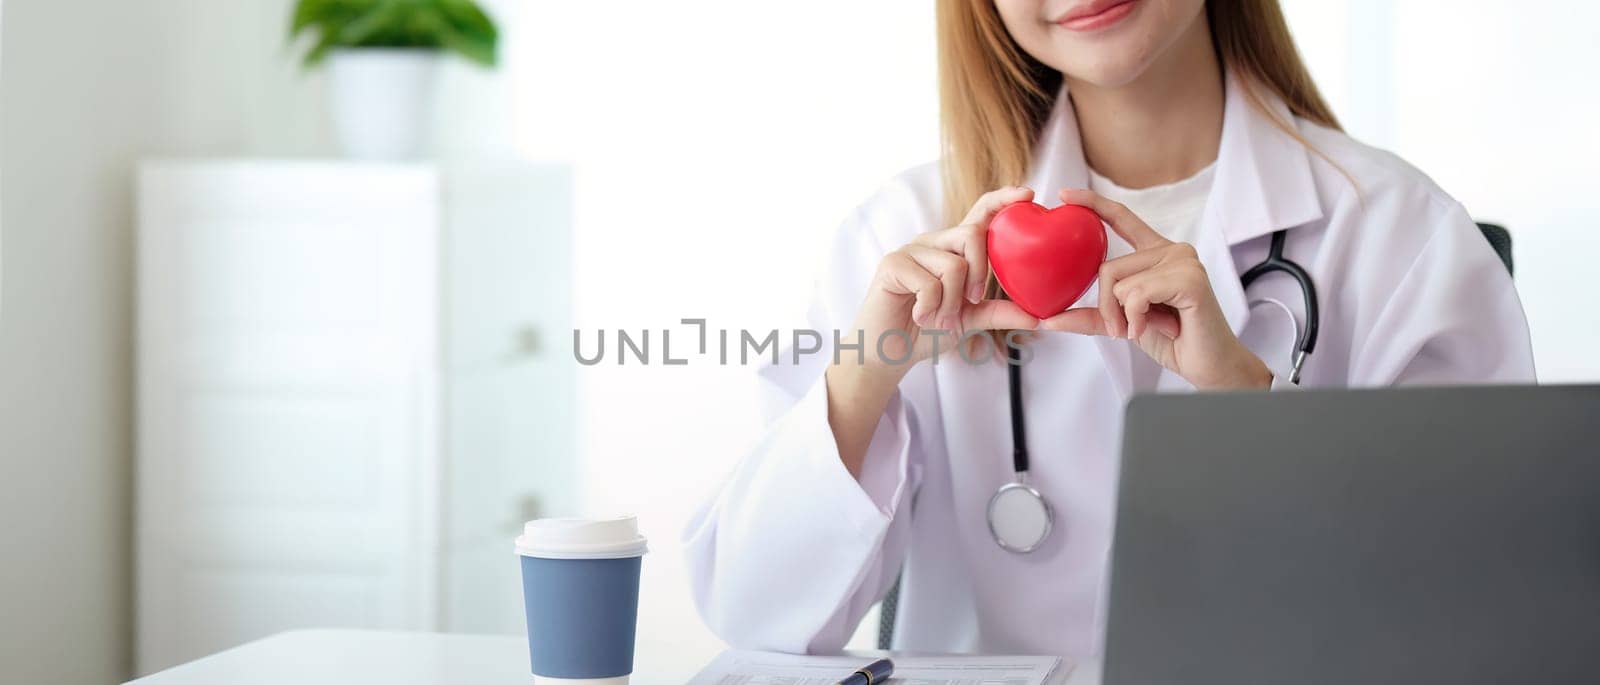 Happy young doctor woman holding red heart shape object, looking at camera with smile. Positive practitioner, cardiologist.